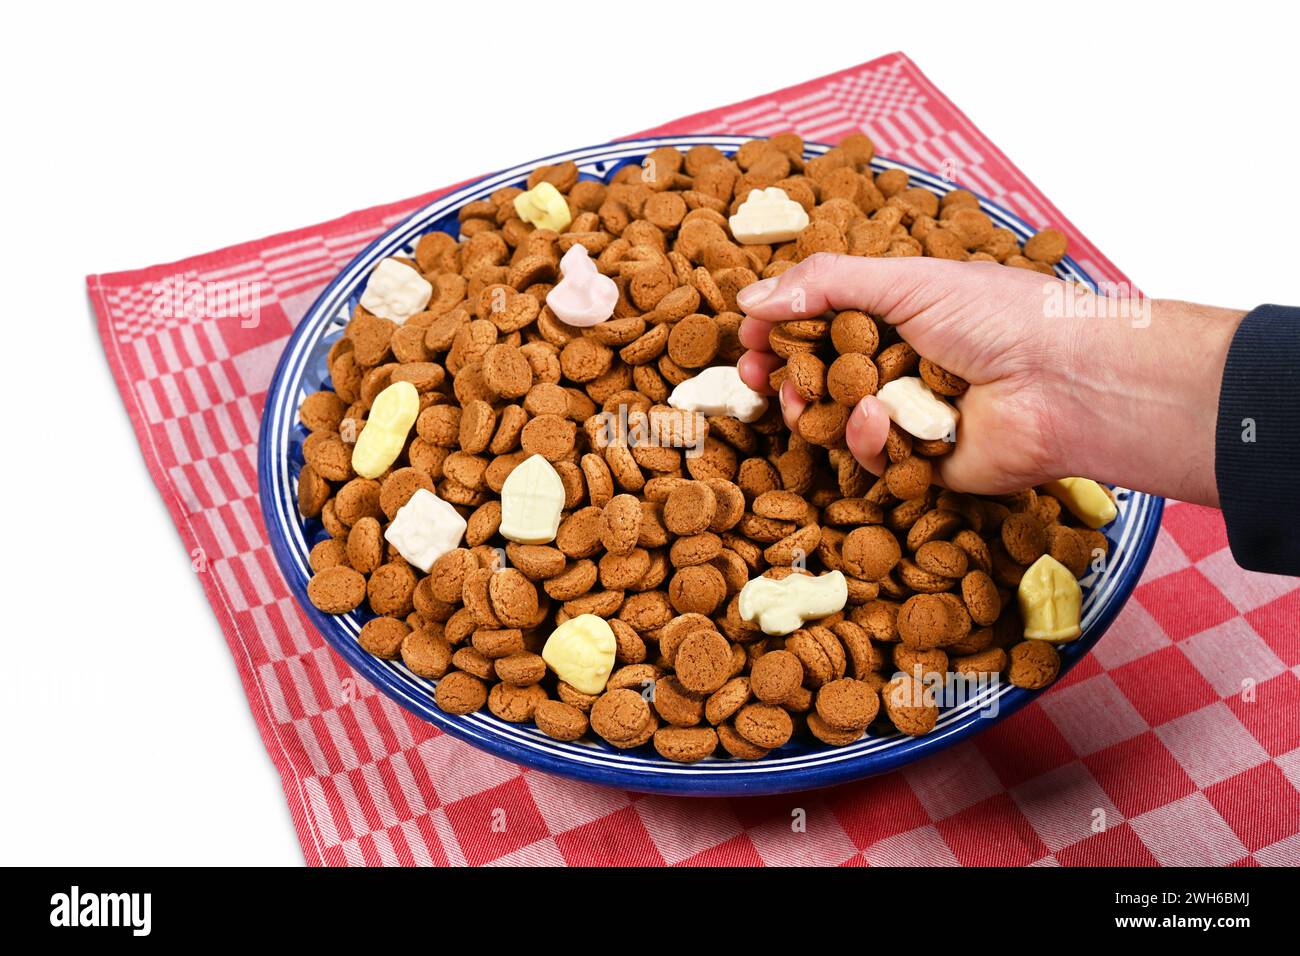 Bowl full of sweets Stock Photo